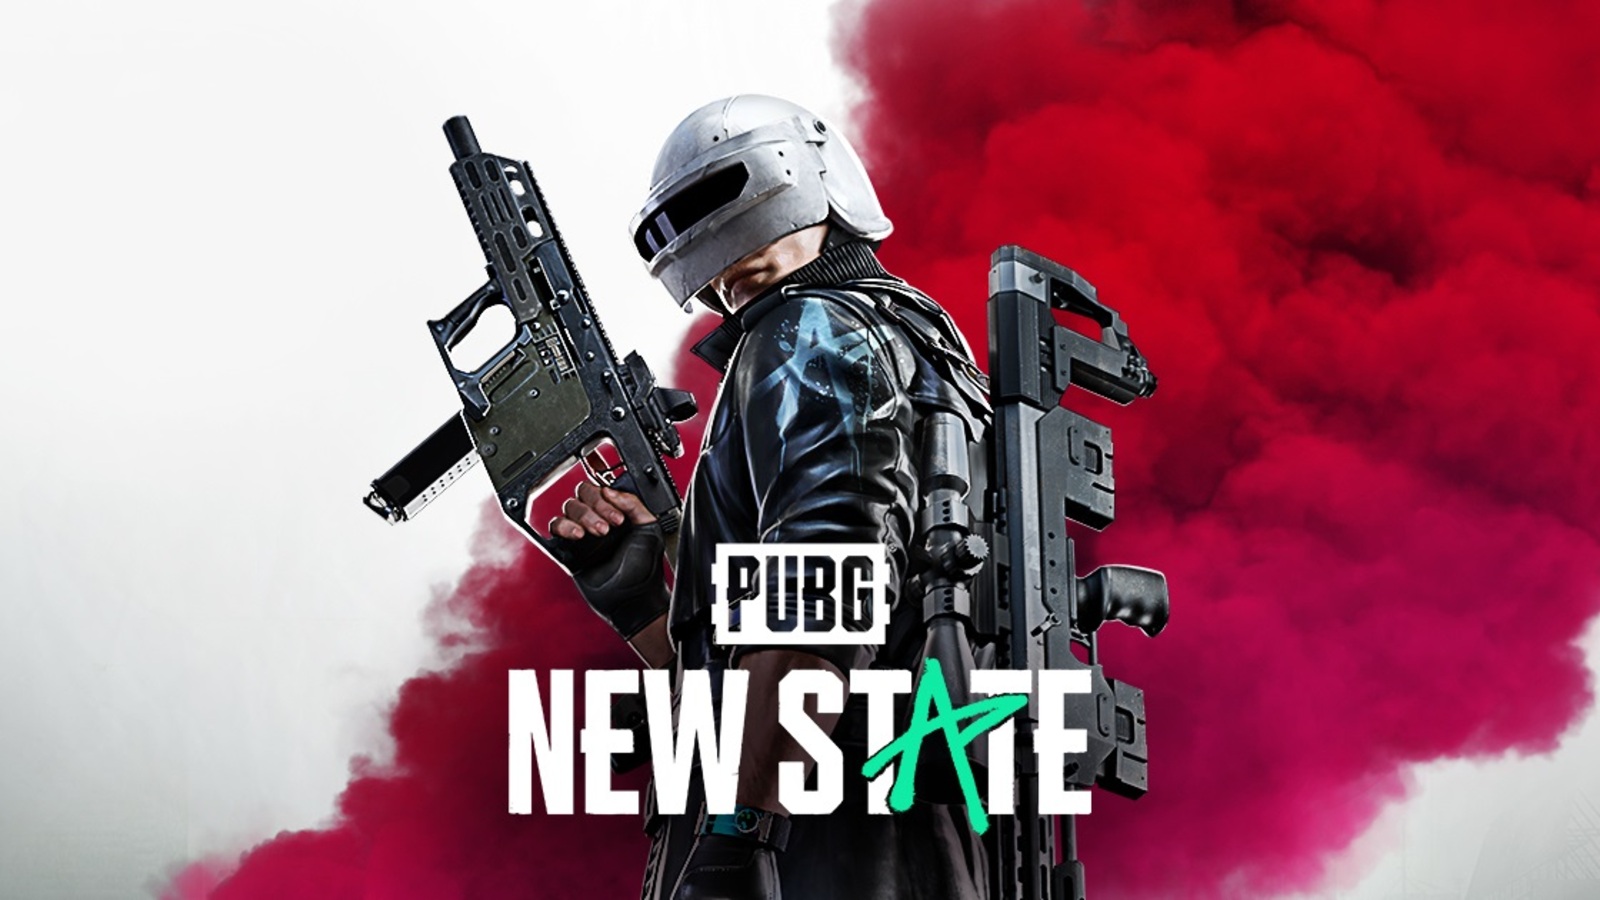 Report pubg new state brings in m in first week